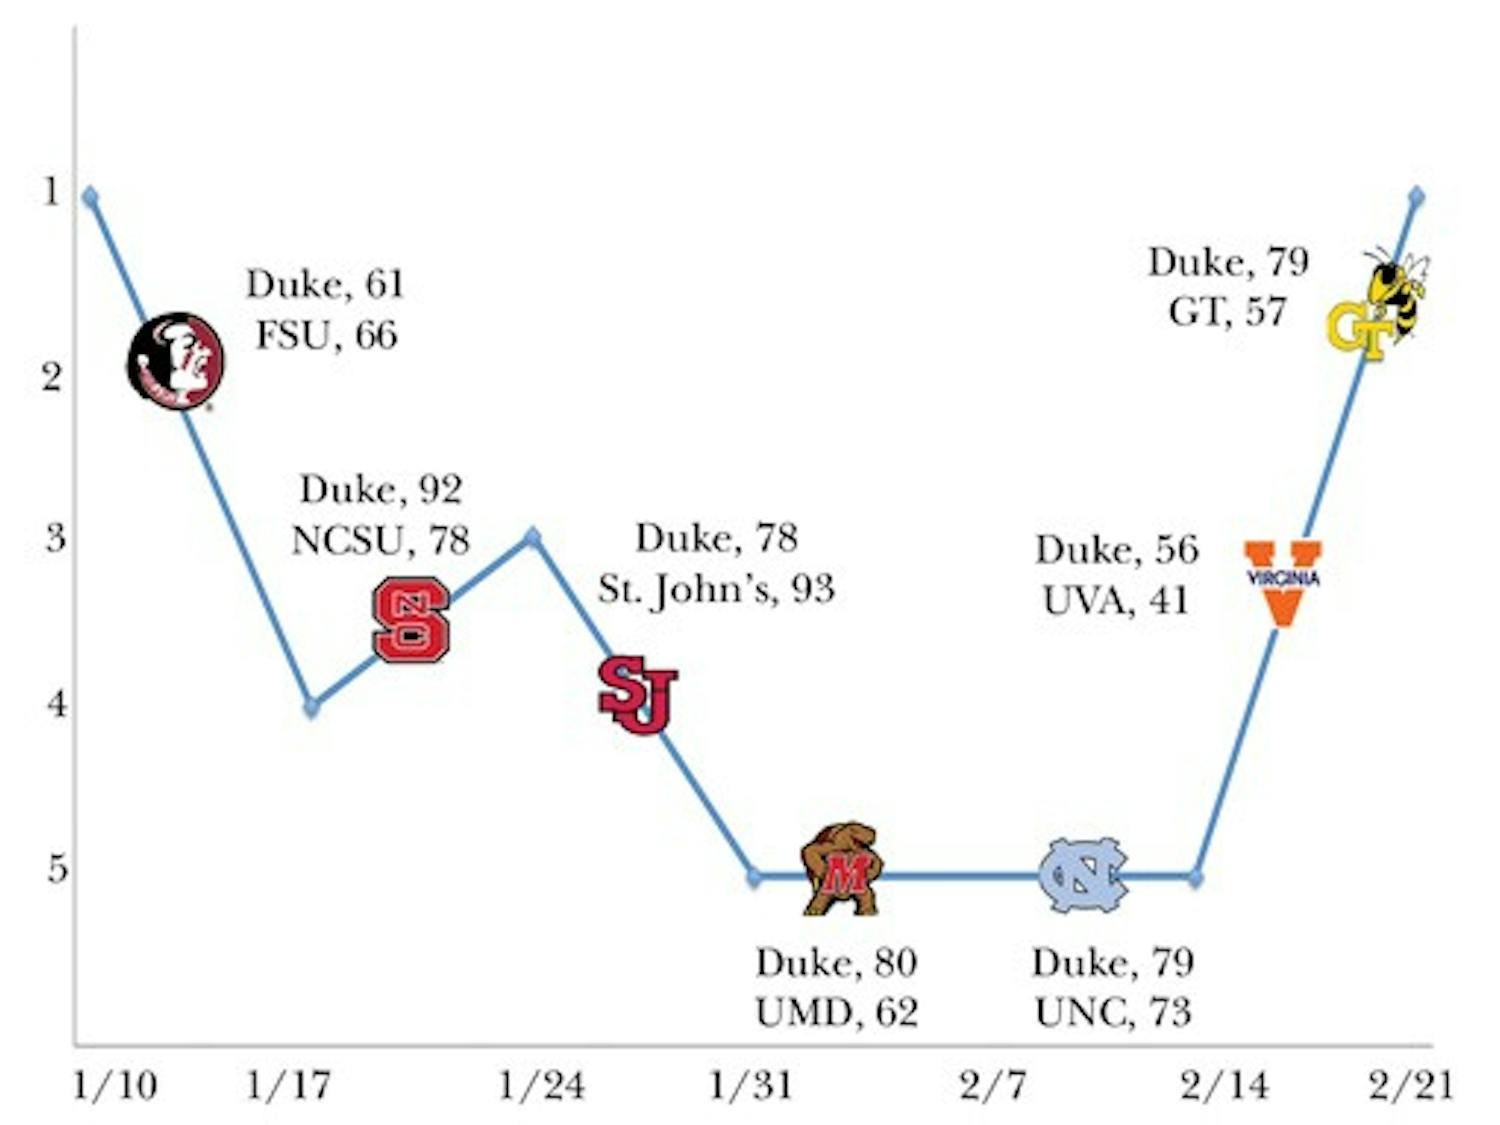 After 10 straight weeks at No. 1, Duke lost to Florida State and St. John’s and fell as low as fifth in the rankings. Yesterday the team returned to the top spot.